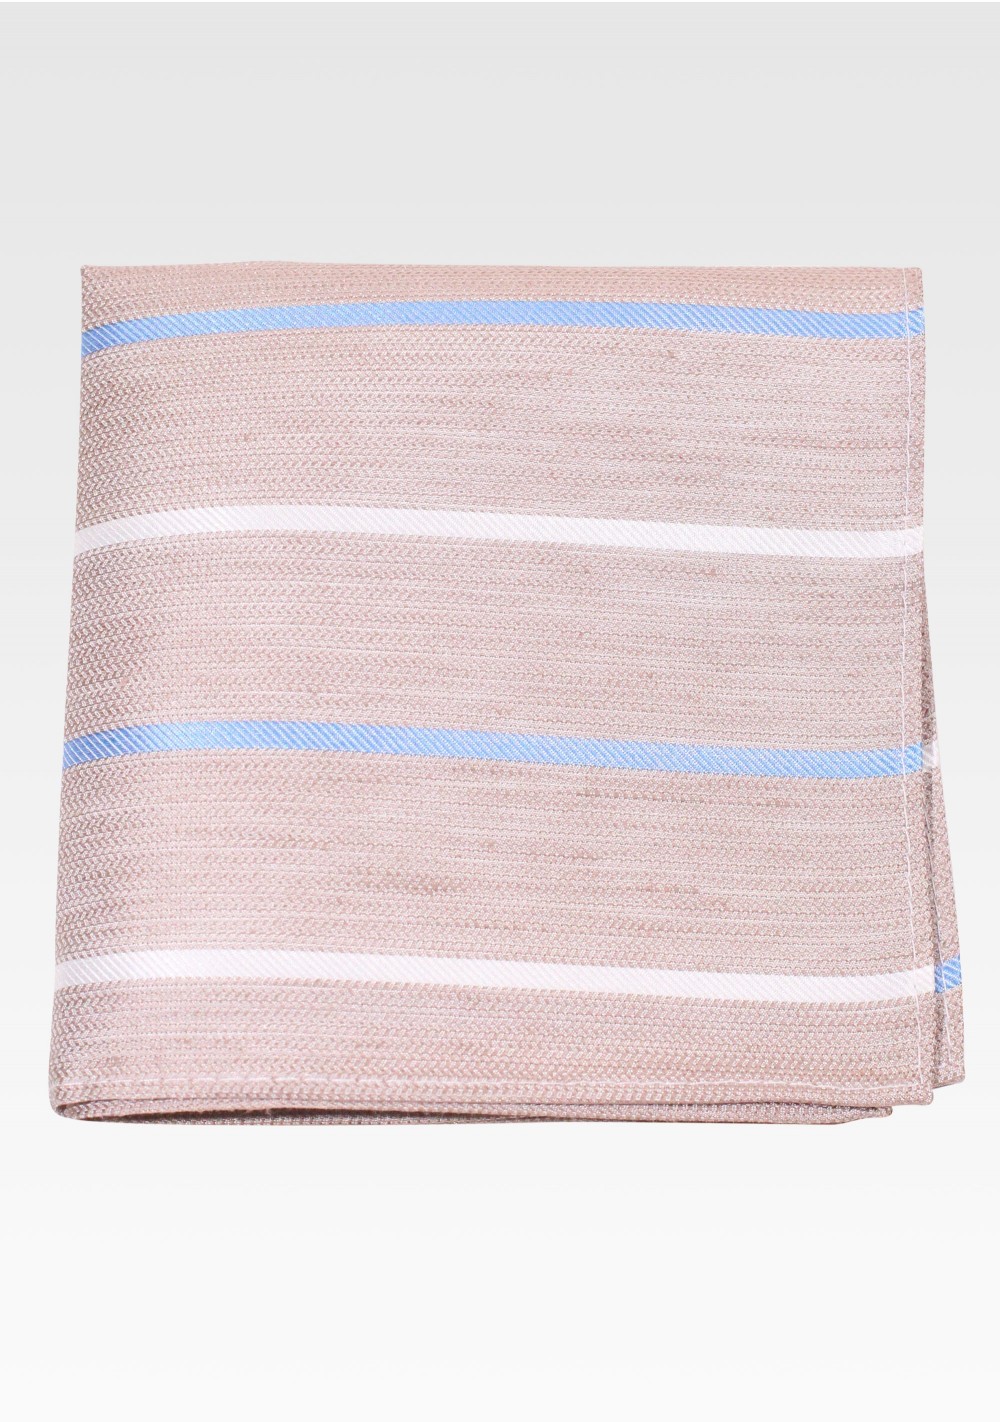 Wheat Color Linen Silk Pocket Square with Stripes